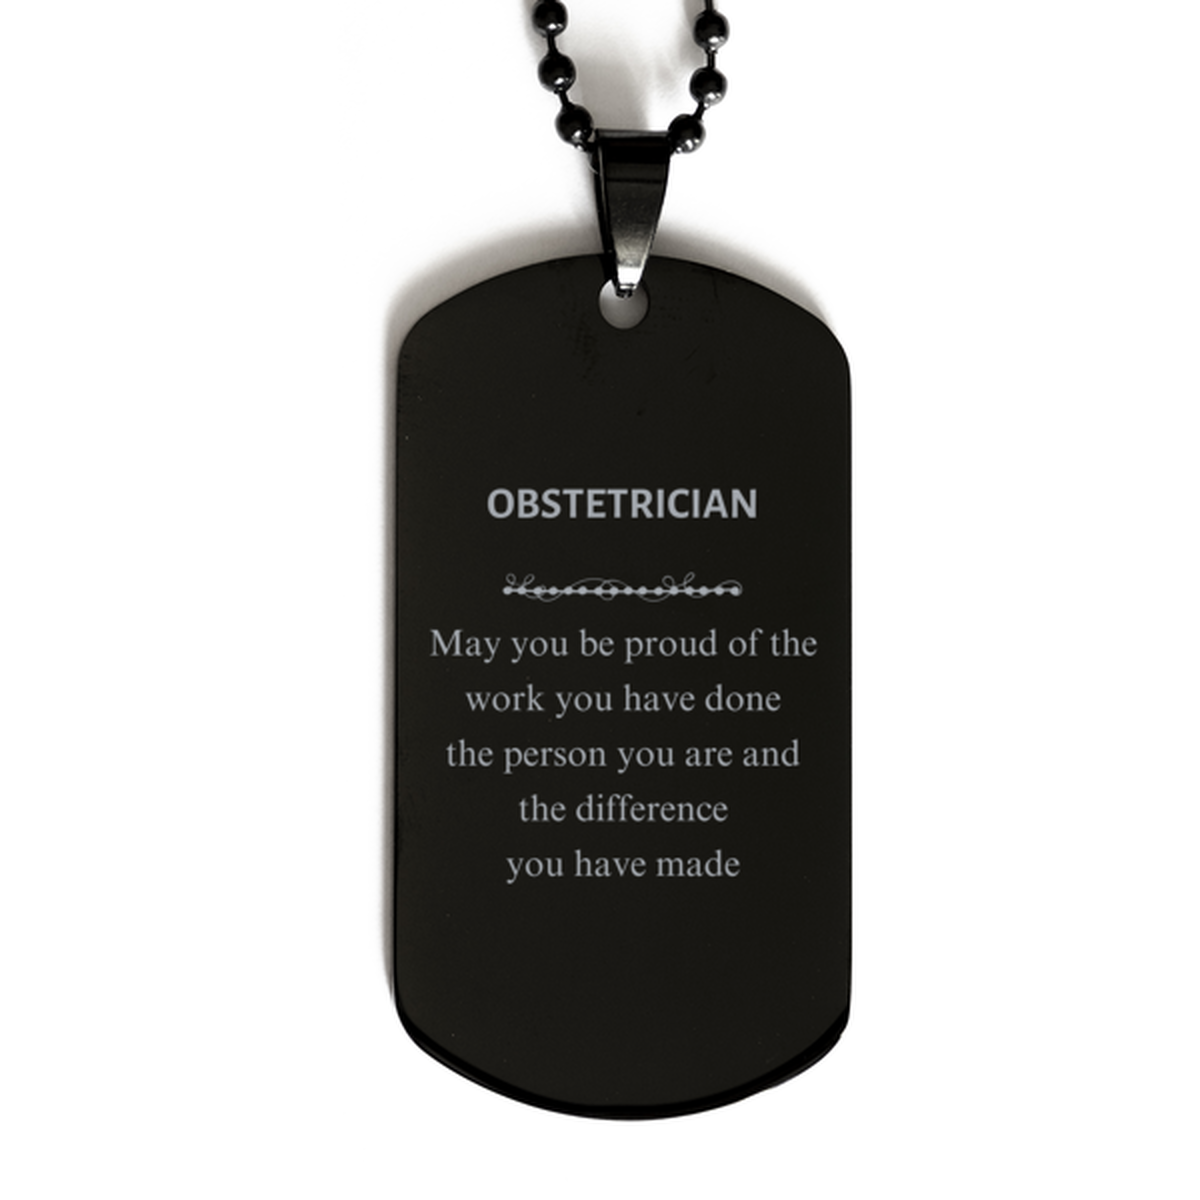 Obstetrician May you be proud of the work you have done, Retirement Obstetrician Black Dog Tag for Colleague Appreciation Gifts Amazing for Obstetrician